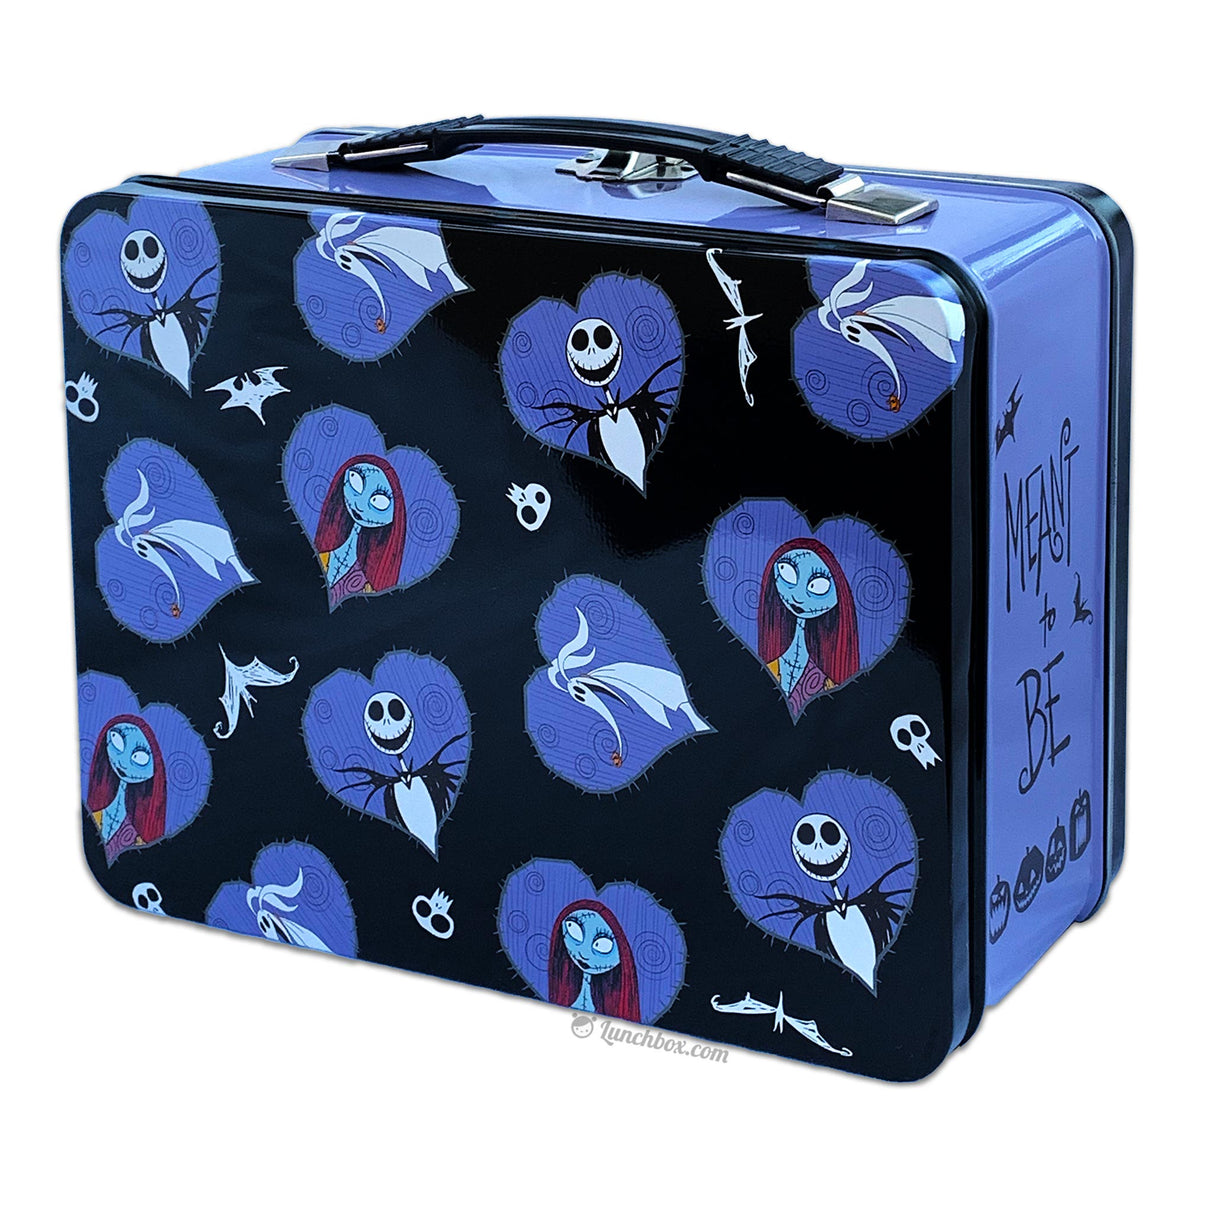 The Nightmare Before Christmas Lunchbox